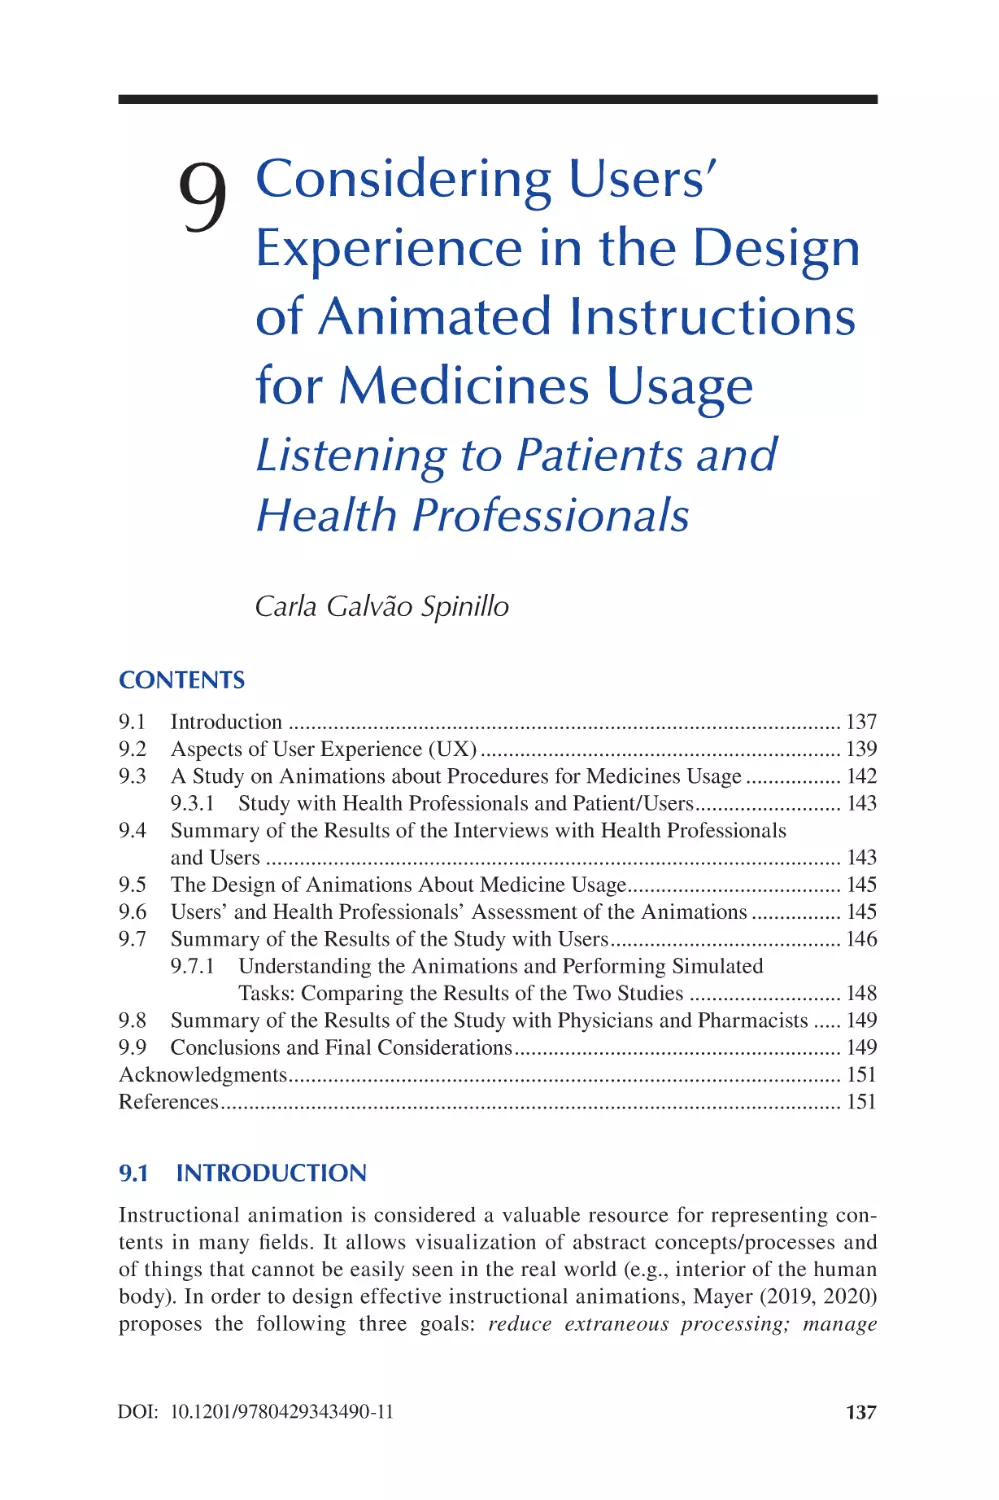 Chapter 9 Considering Users’ Experience in the Design of Animated Instructions for Medicines Usage
9.1 Introduction